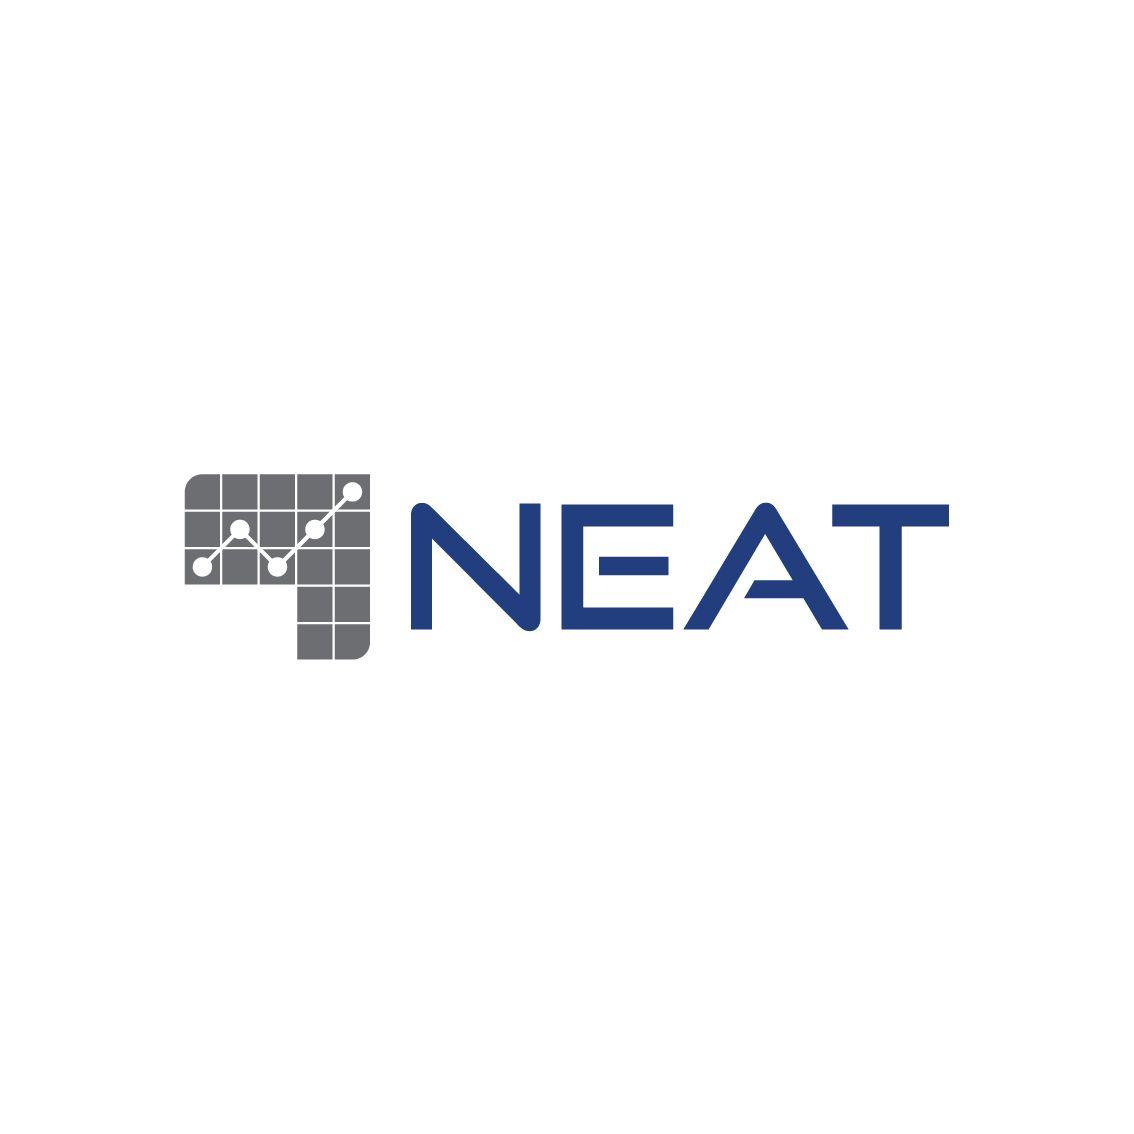 Neat Logo - Modern, Bold, Software Logo Design for neat by labscastle. Design